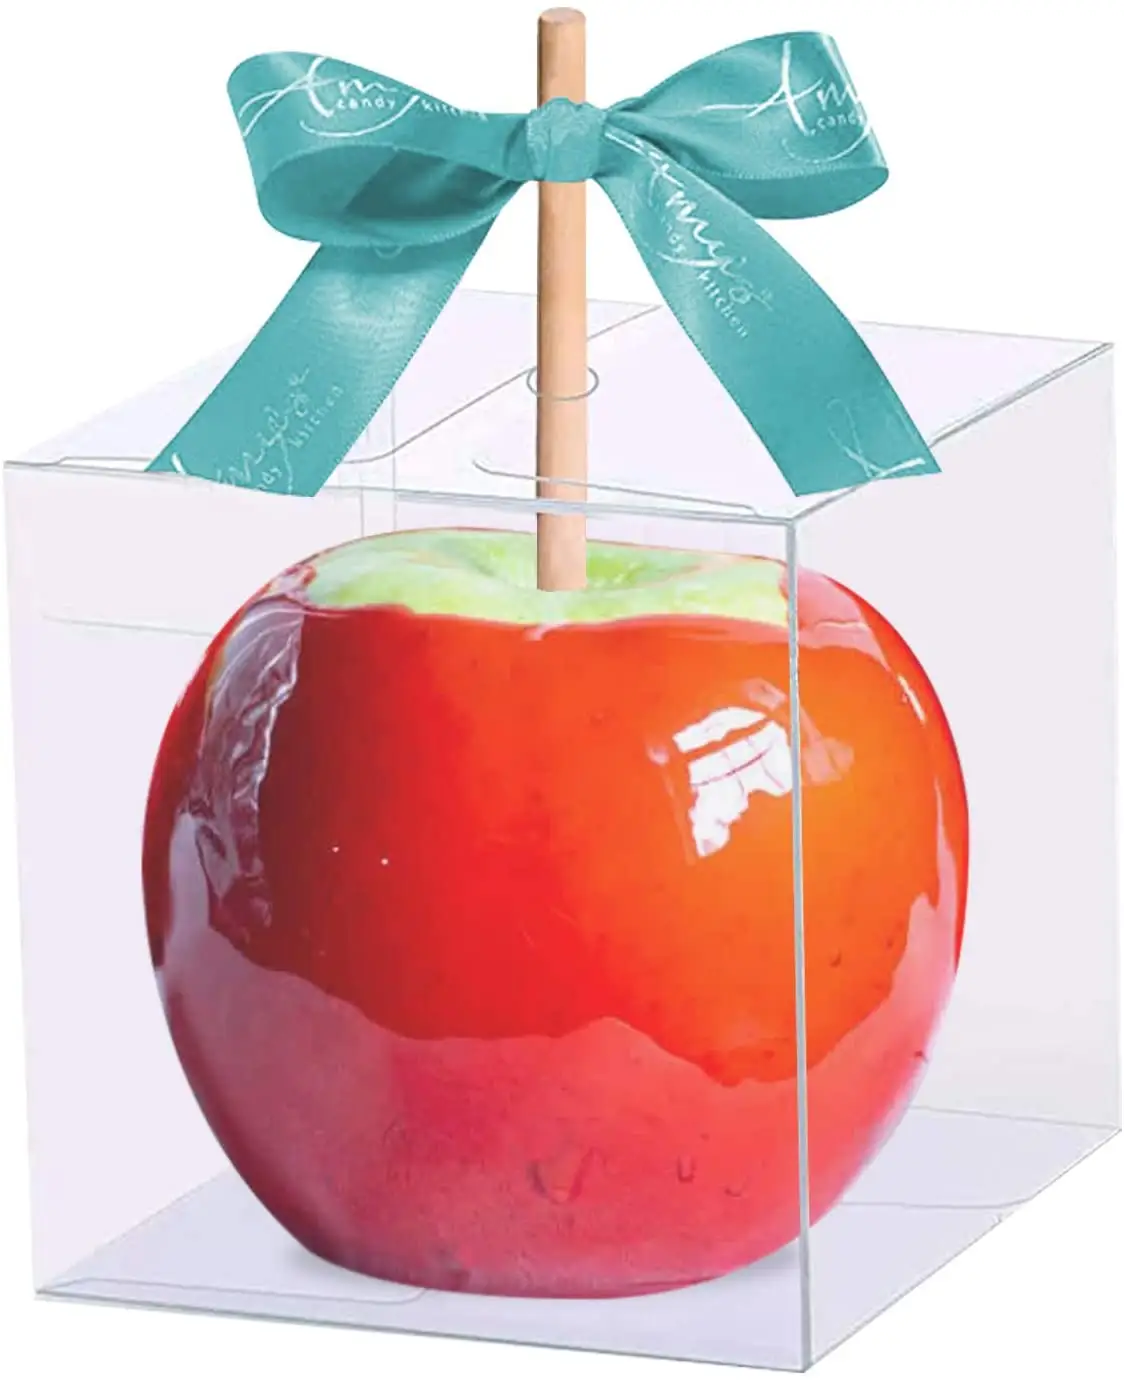 Wholesale 4" x 4" x 4" PET Clear Gift Boxes For Caramel Apples Transparent Boxes plastic candy boxes With Hole Top